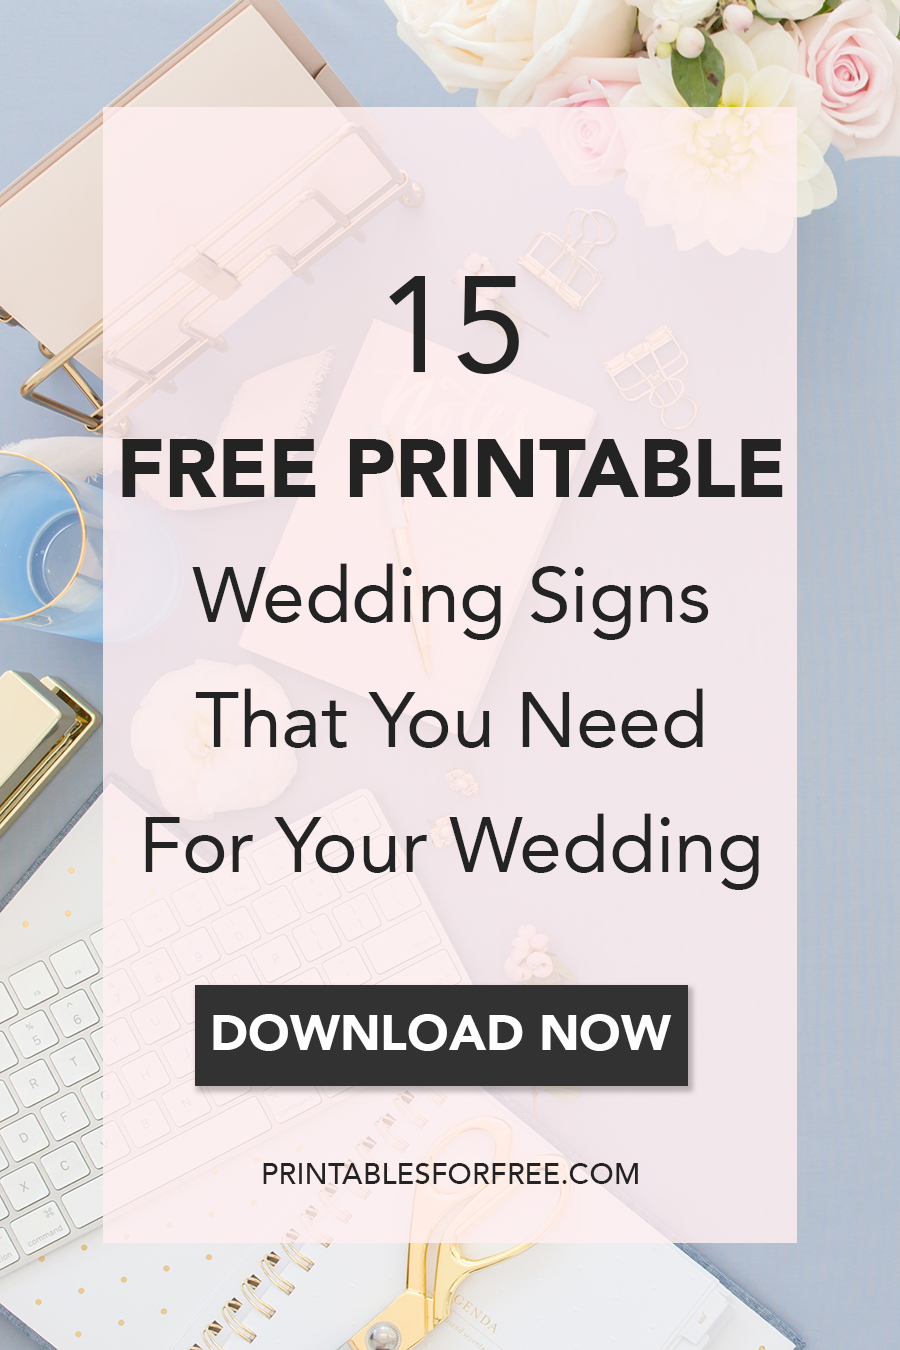 15 Free Printable Wedding Signs That You Need For Your Wedding - Free Printable Wedding Signs